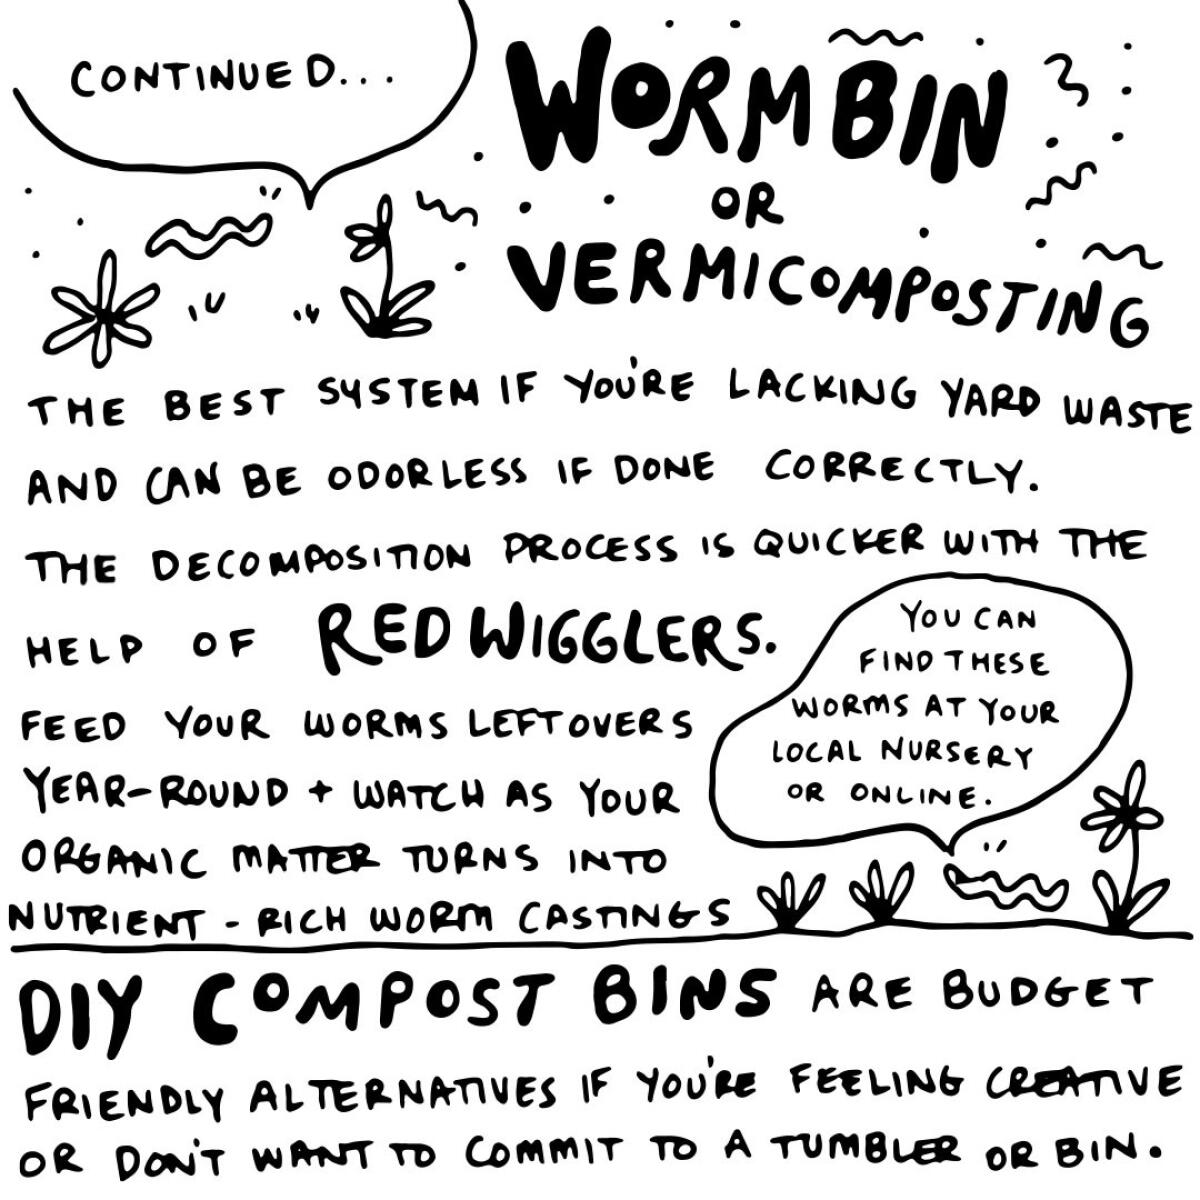 "continued... wormbin or vermicomposting. DIY compost bins are budget friendly alternatives."